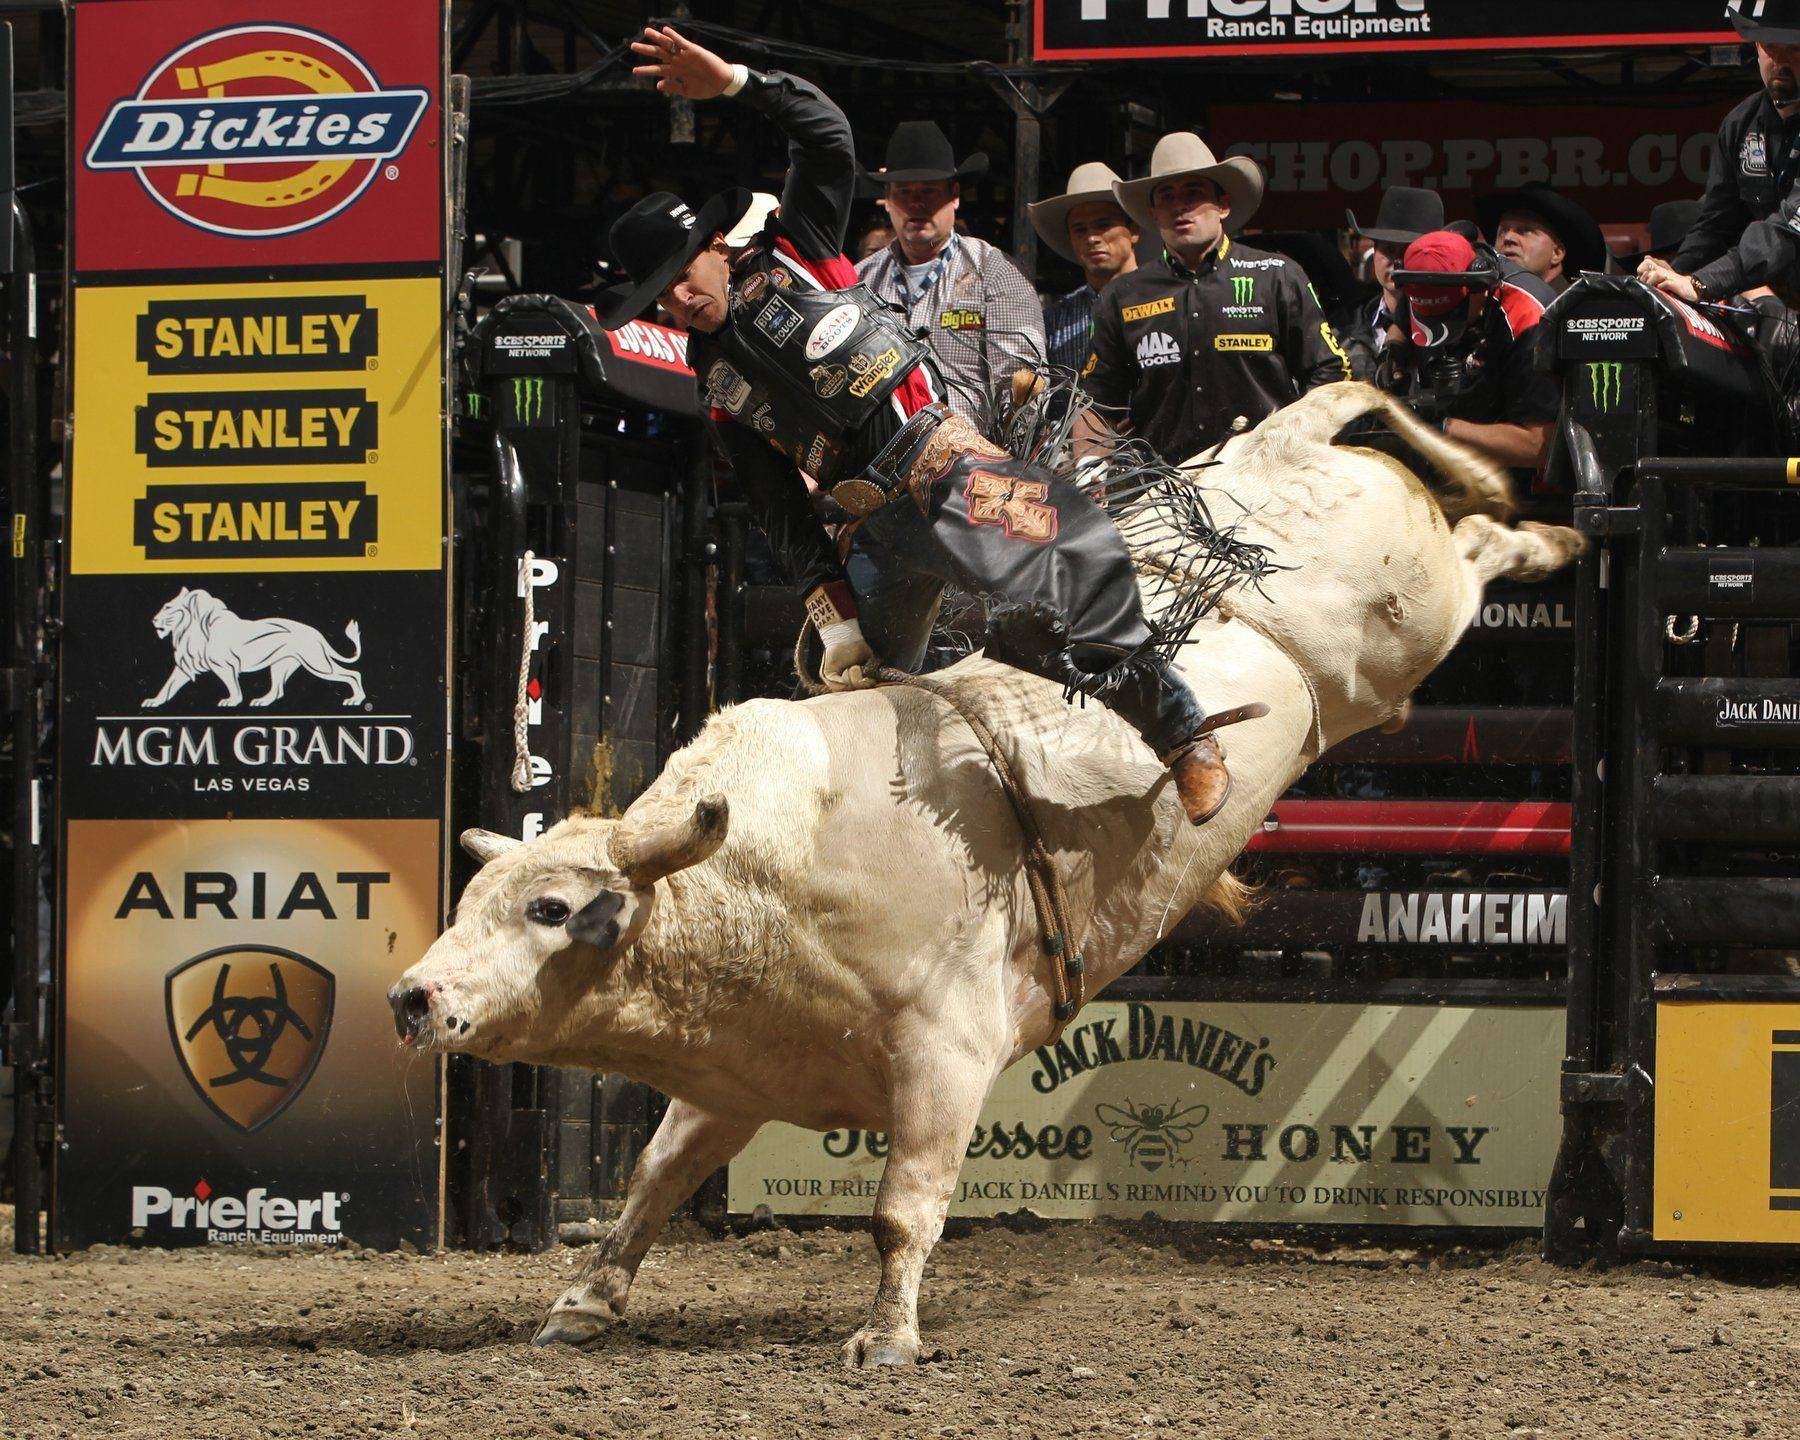 A Daredevil Bull Rider Shows Their Fearlessness And Skill Atop A Raging Bull. Wallpaper